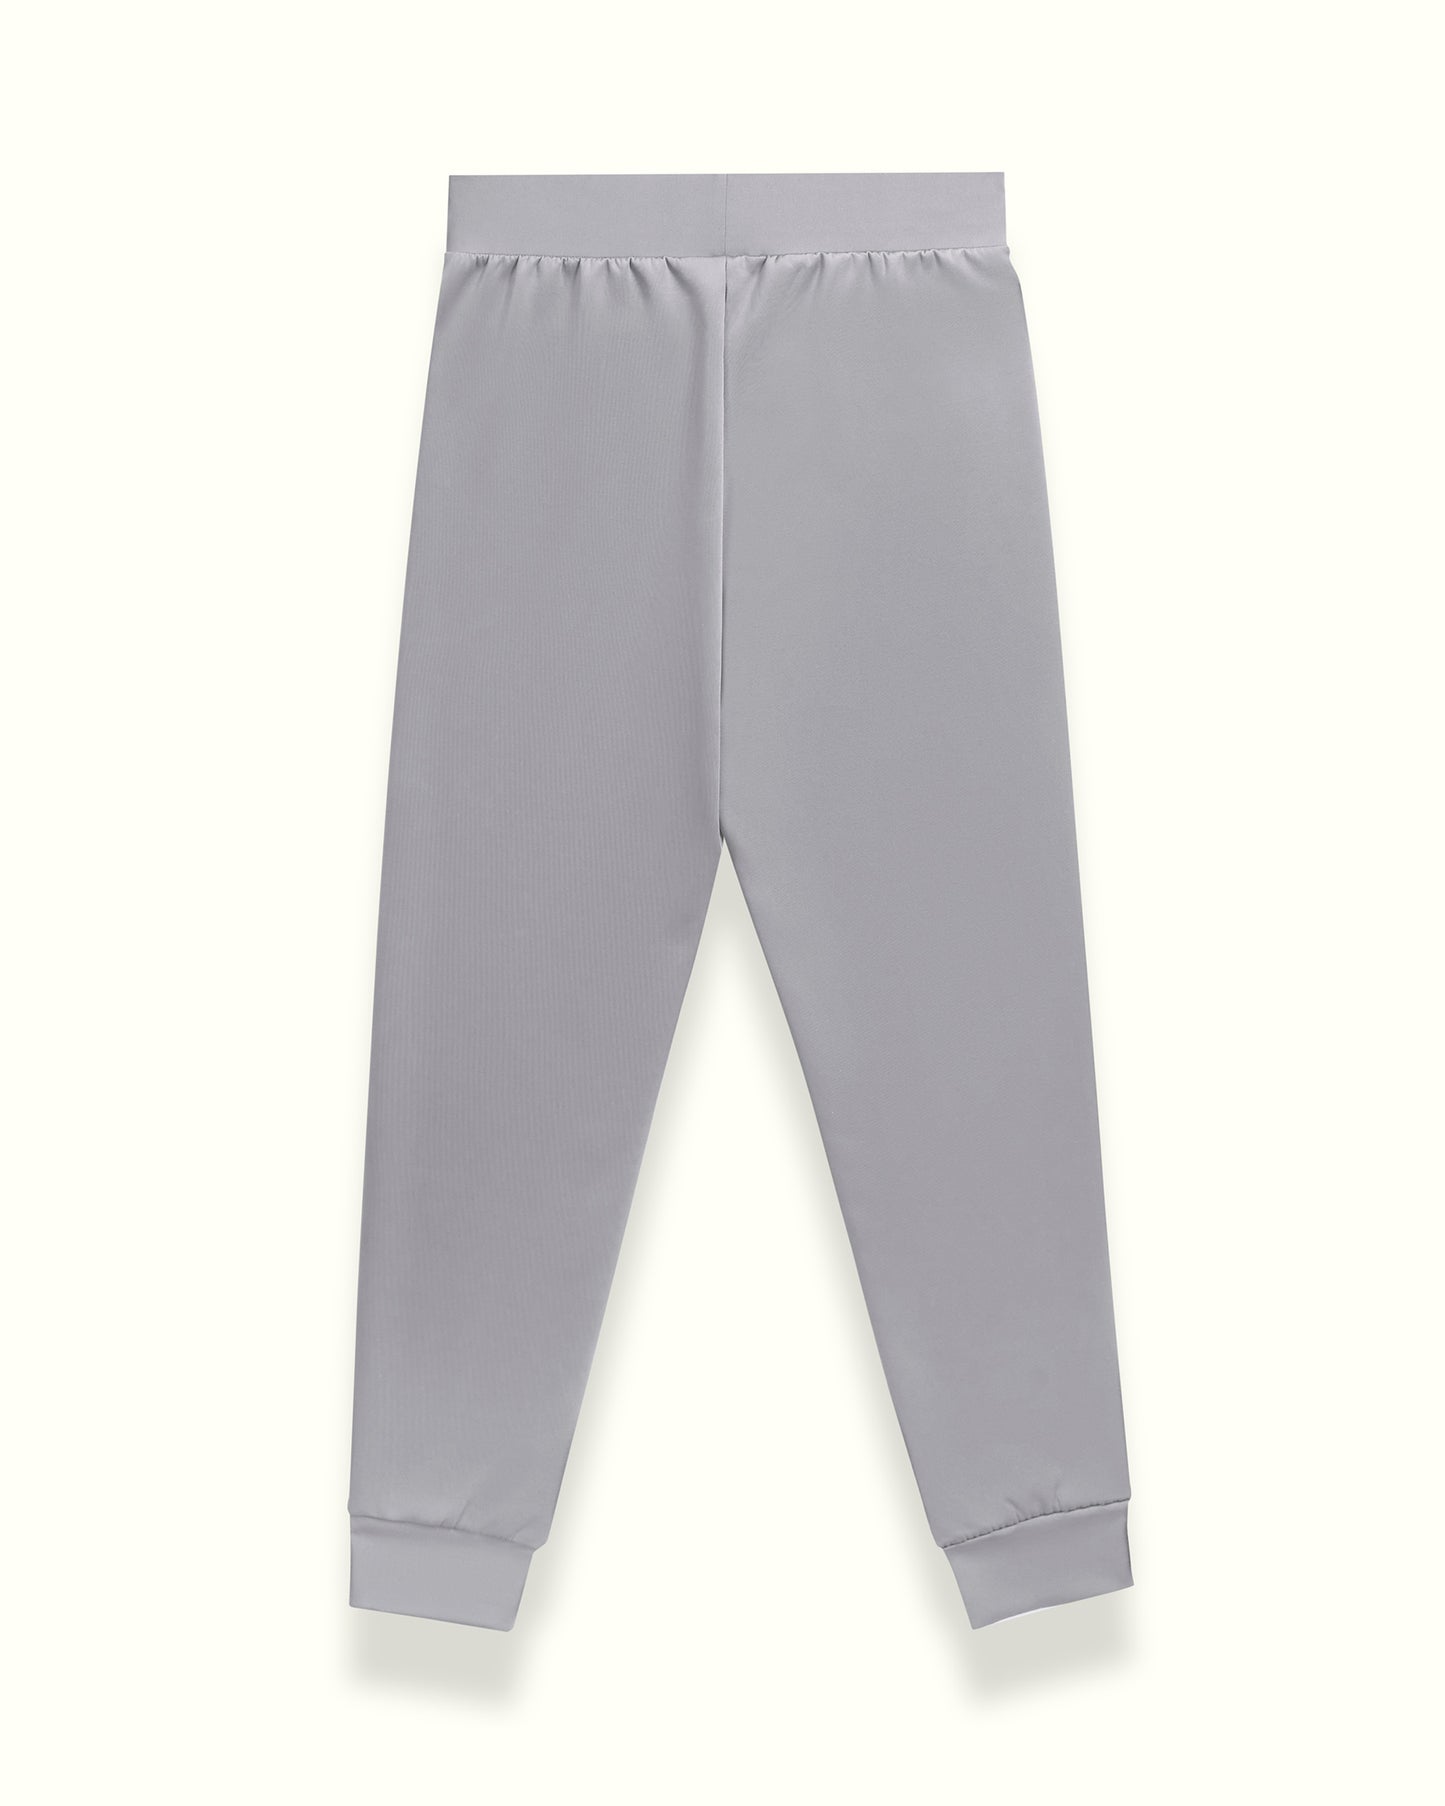 THE BOLD FITTED JOGGER IN LIGHT GREY